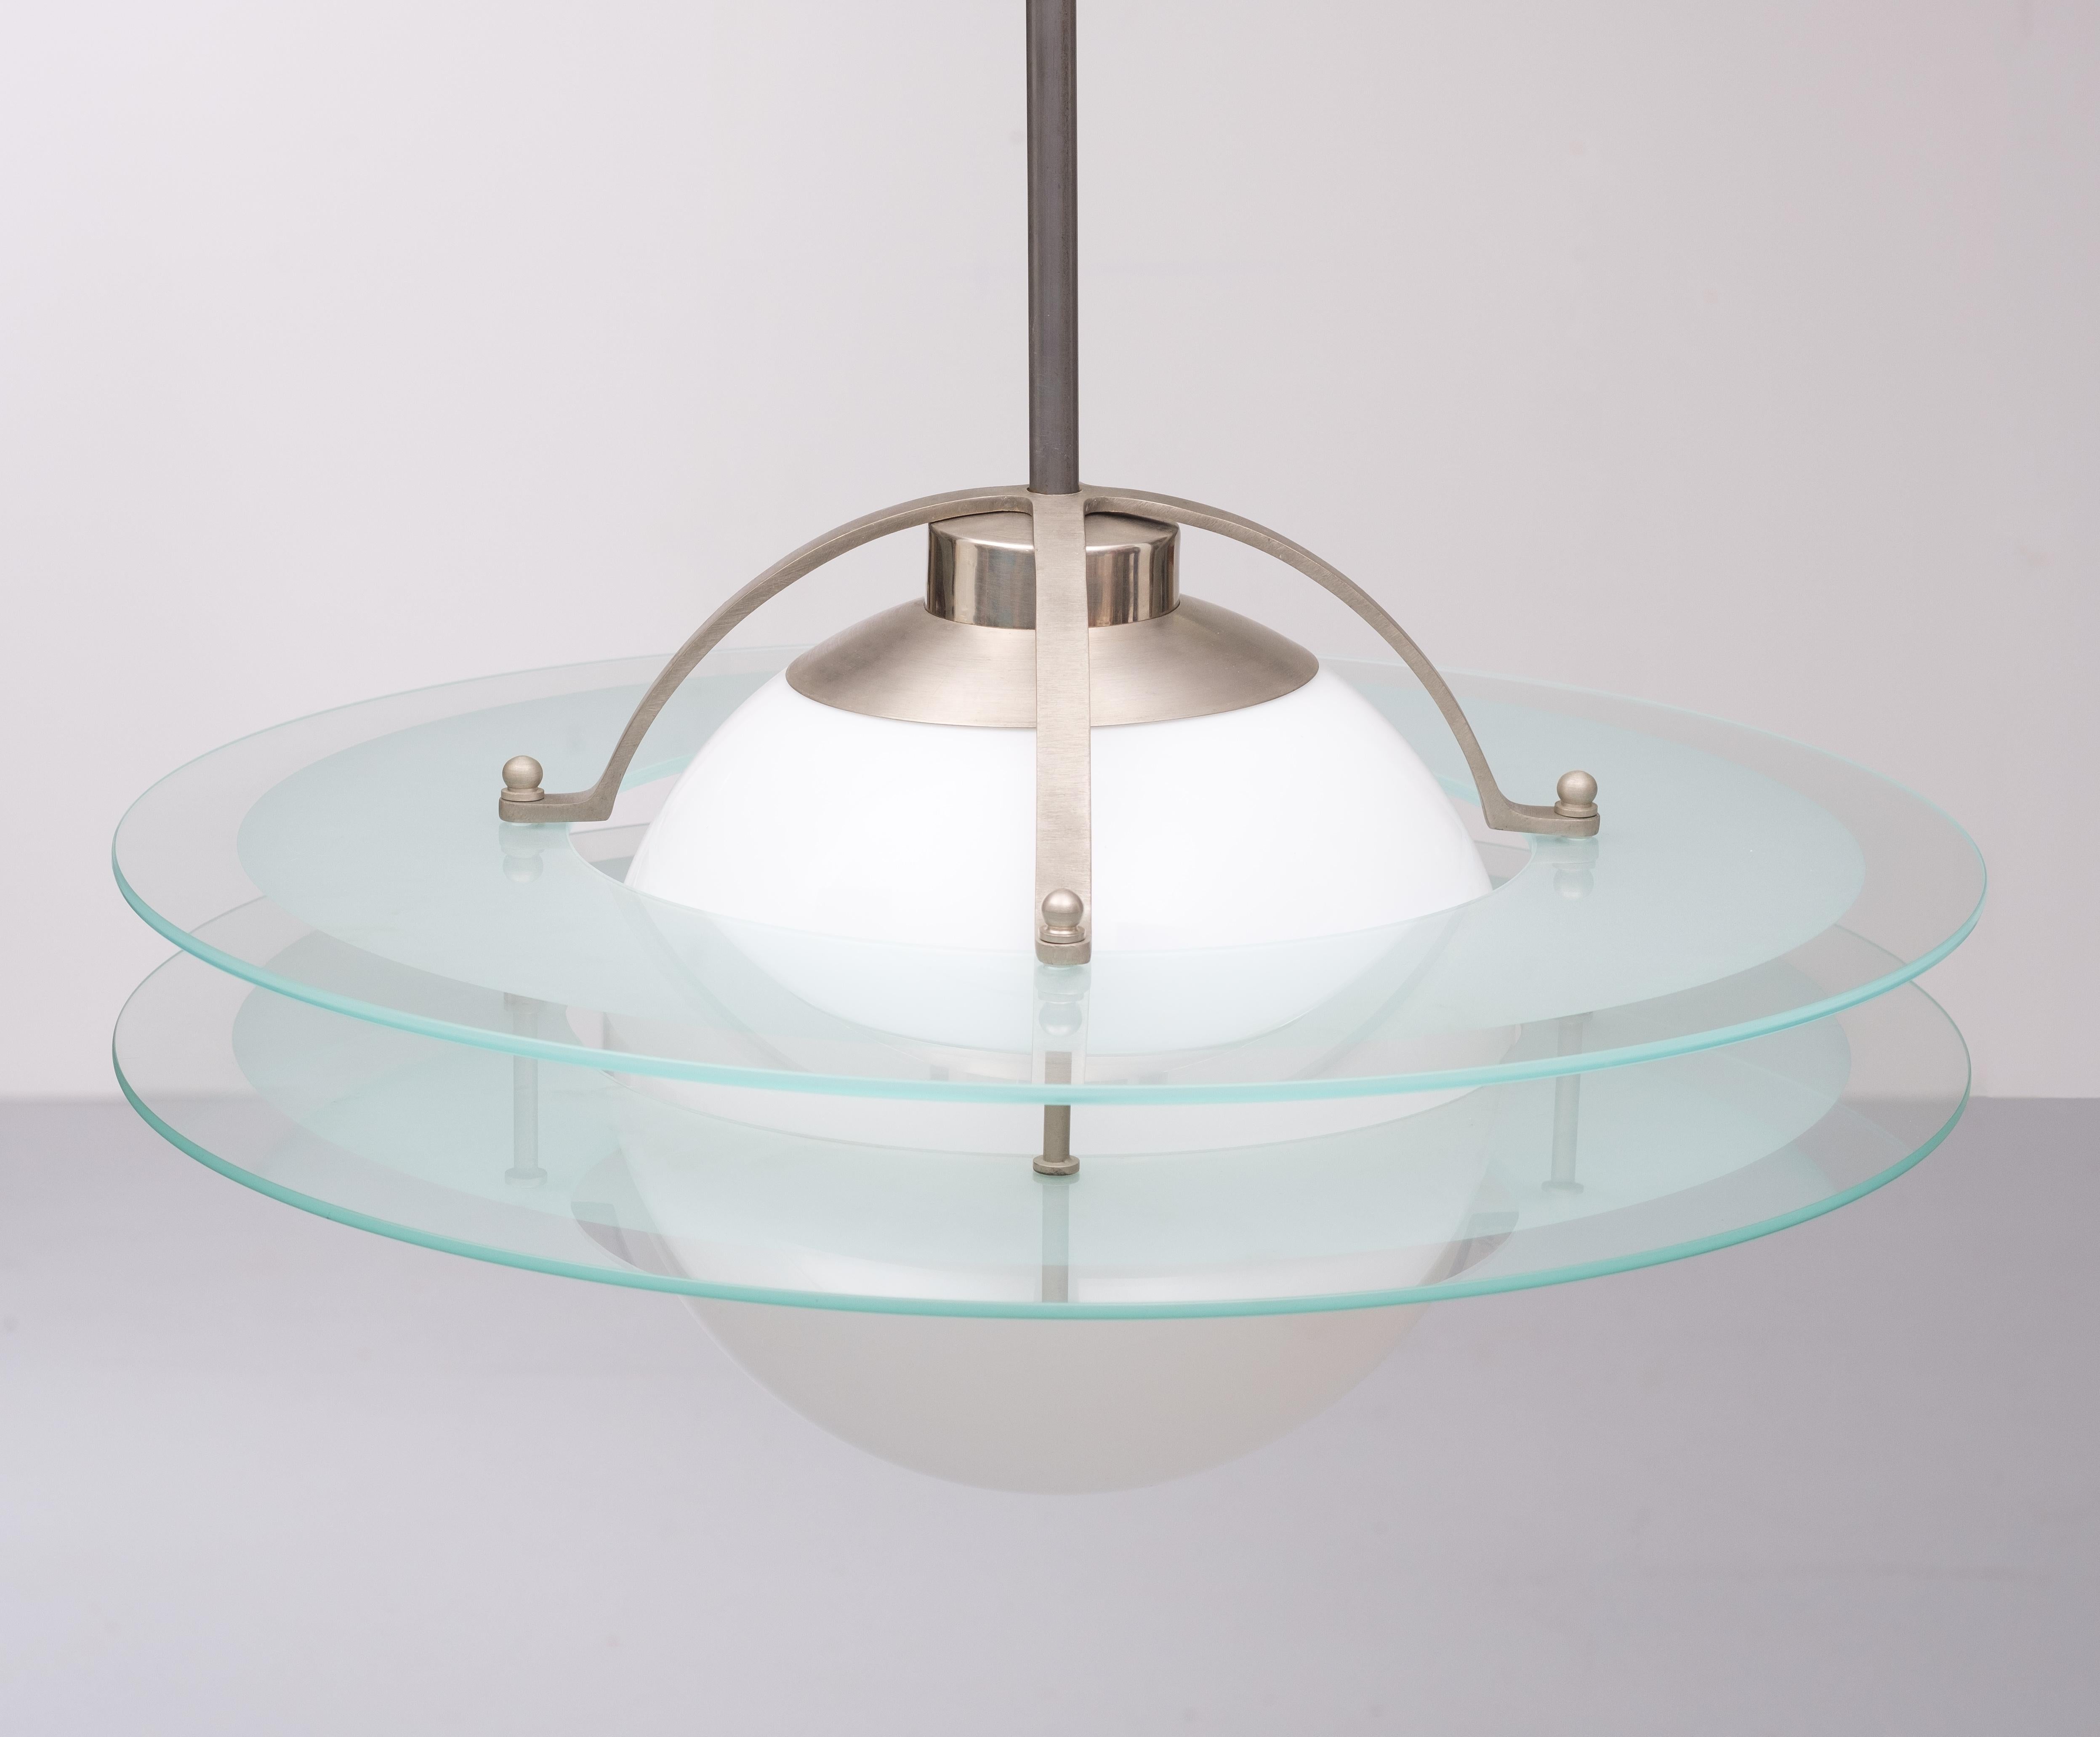 The 'Saturn lamp' was in production from 1931 to 1957, during this period some details of the lamp were changed. From the eighties and nineties of the last century, replicas have been made that are not easy to distinguish from the originals for the